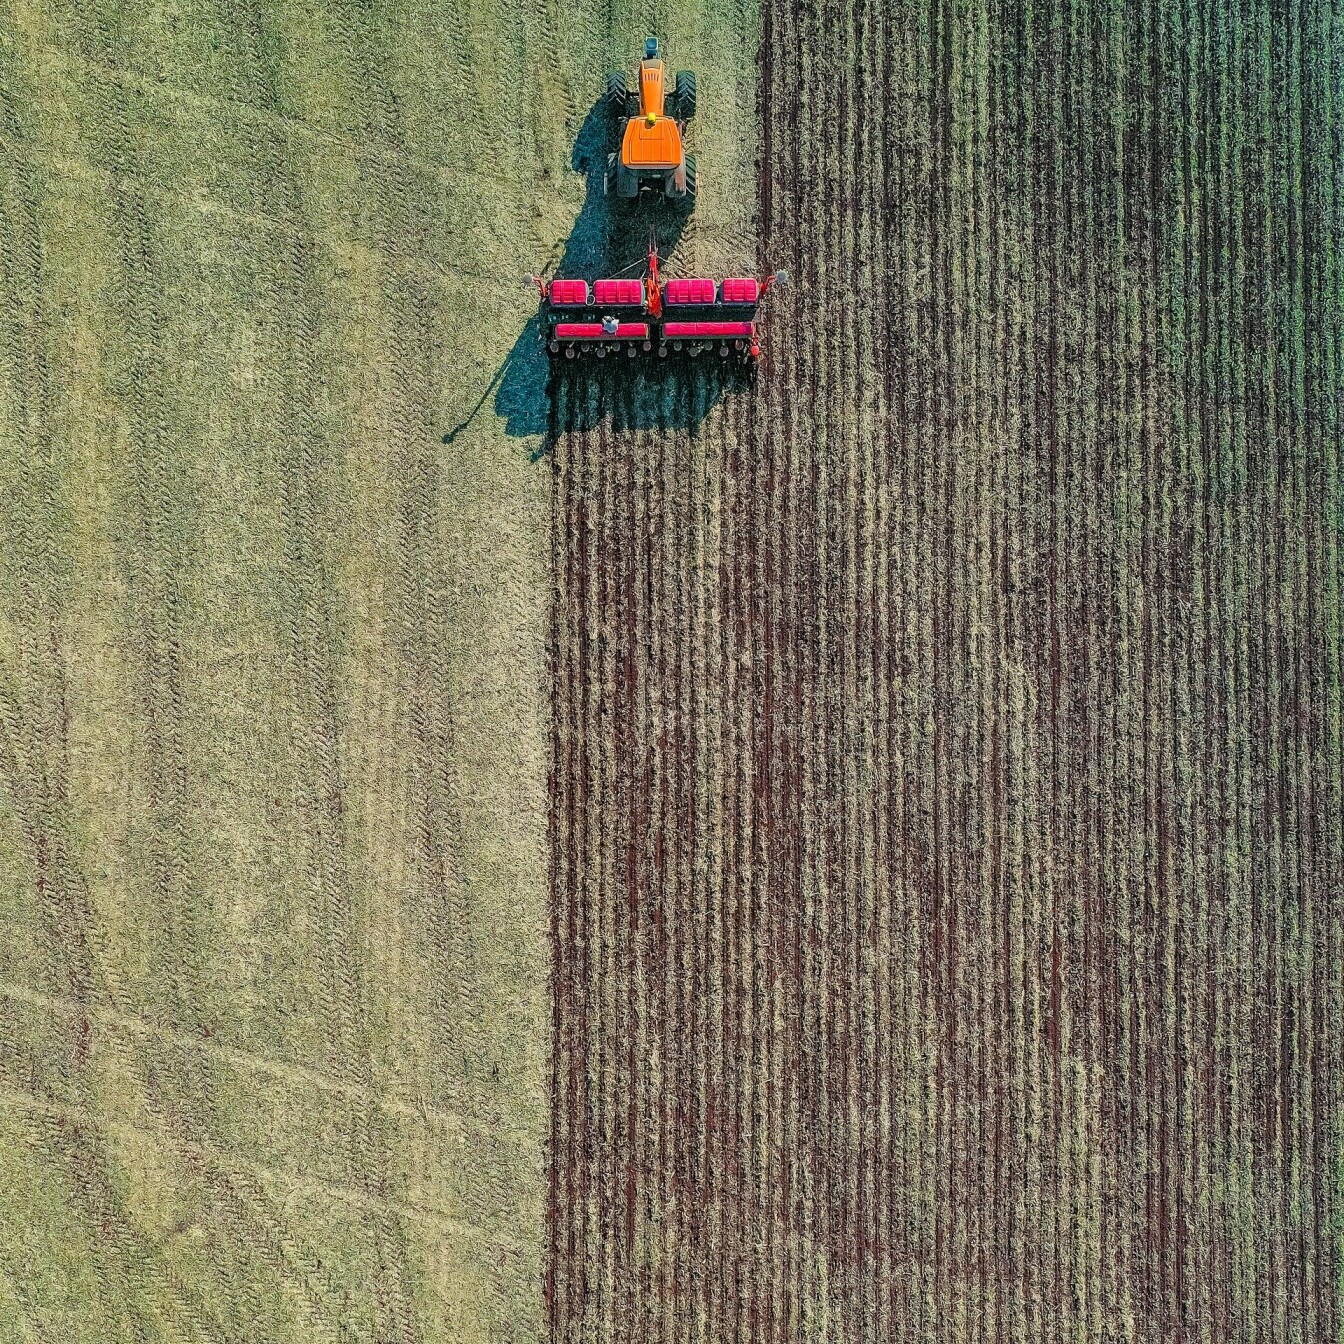 Aerial shot of a tractor pulling a plough